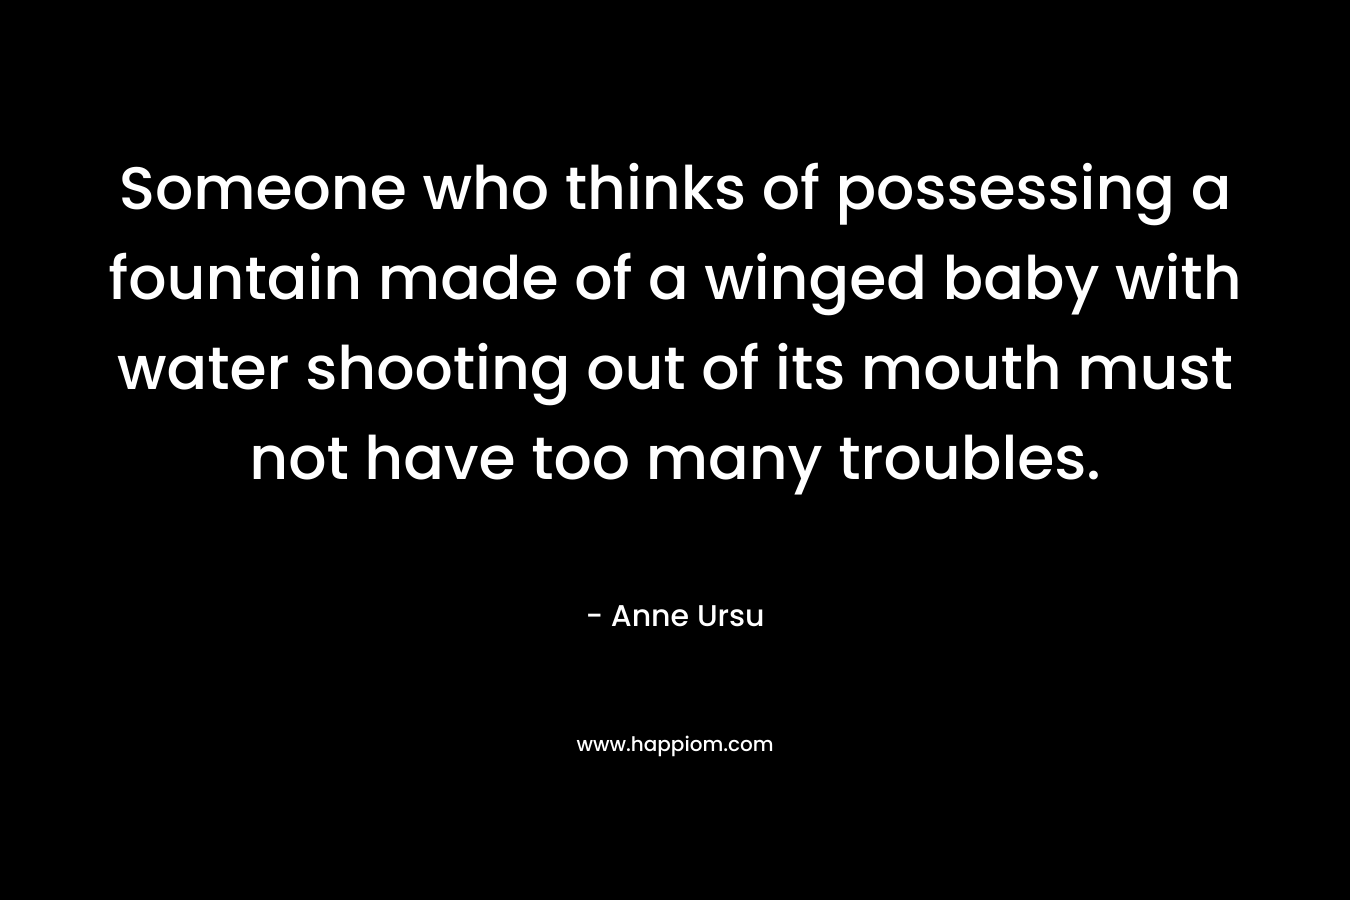 Someone who thinks of possessing a fountain made of a winged baby with water shooting out of its mouth must not have too many troubles. – Anne Ursu